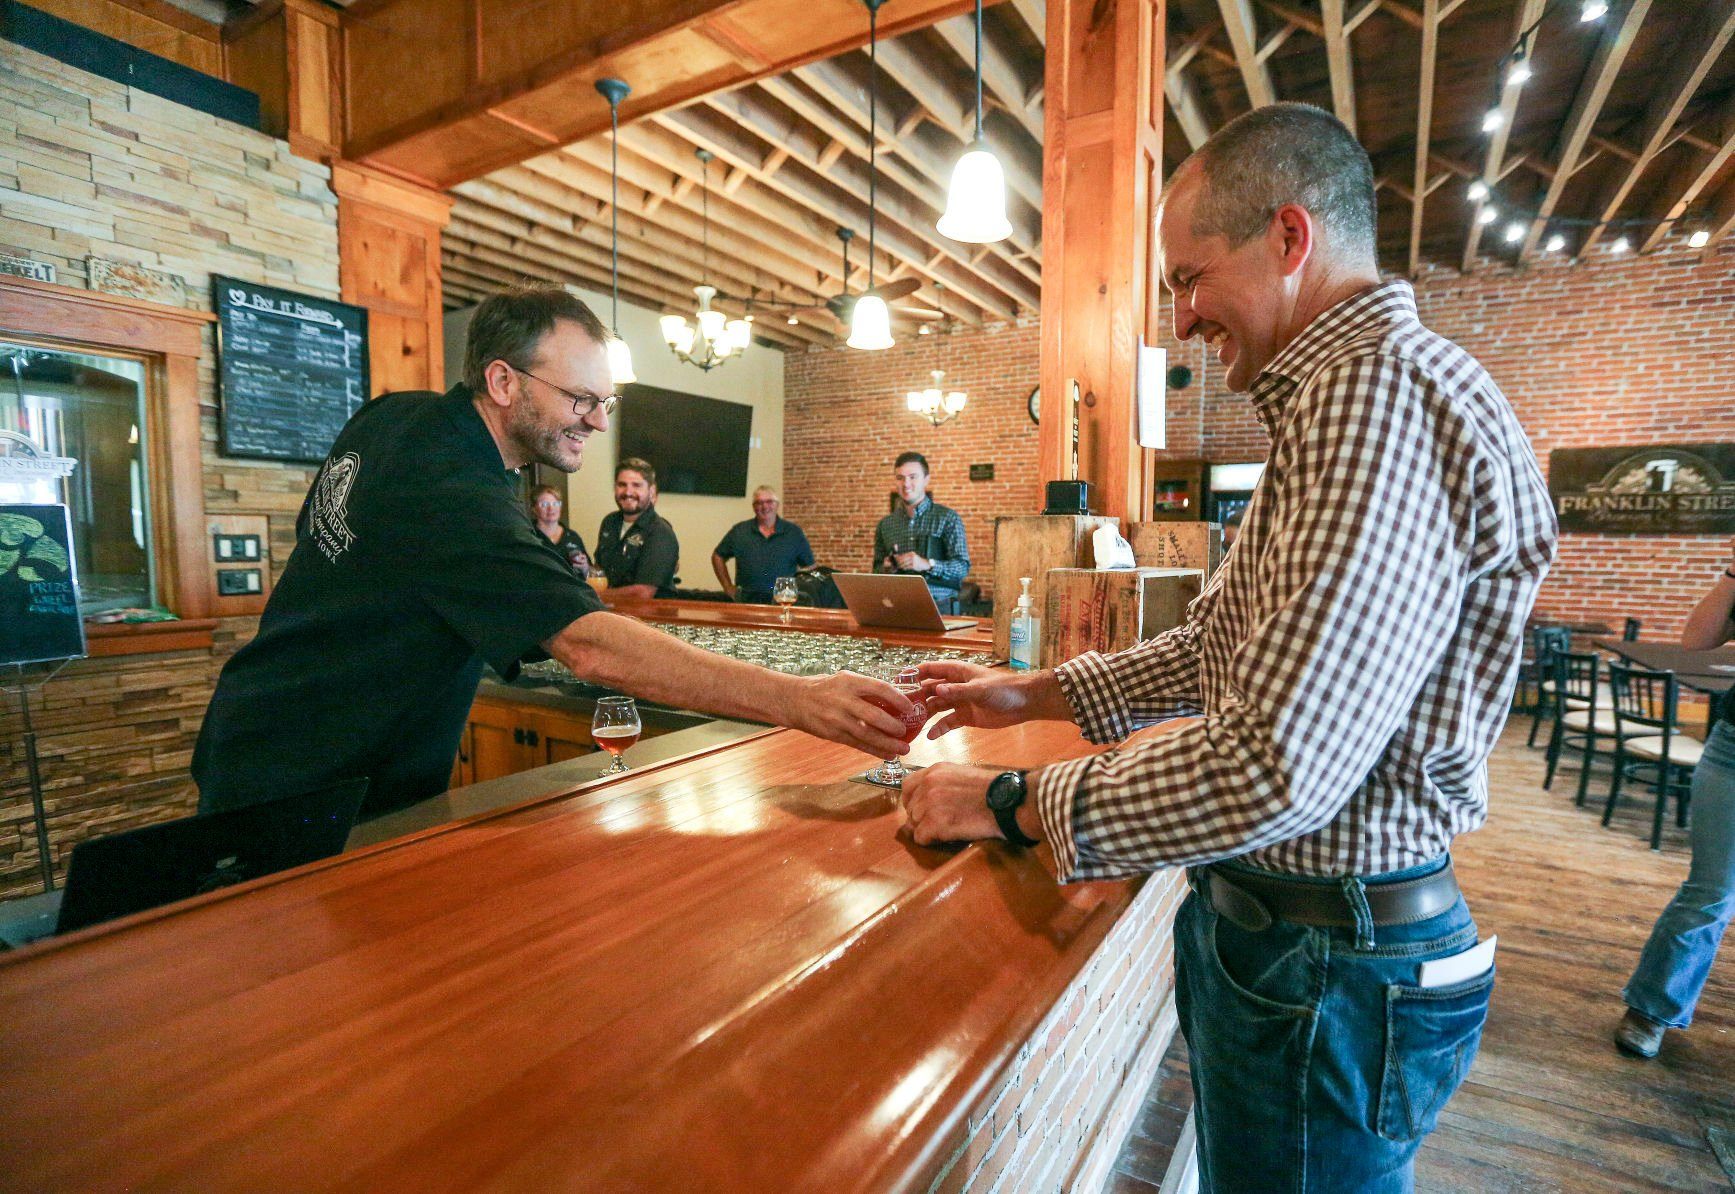 Franklin Street Brewing Company co-owner, Kyle Sands (left), serves up a sample of their product to Iowa Secretary of Agriculture Mike Naig who was in Manchester, Iowa on Thursday, Sept. 15 as part of his 99 county tour.    PHOTO CREDIT: Dave Kettering